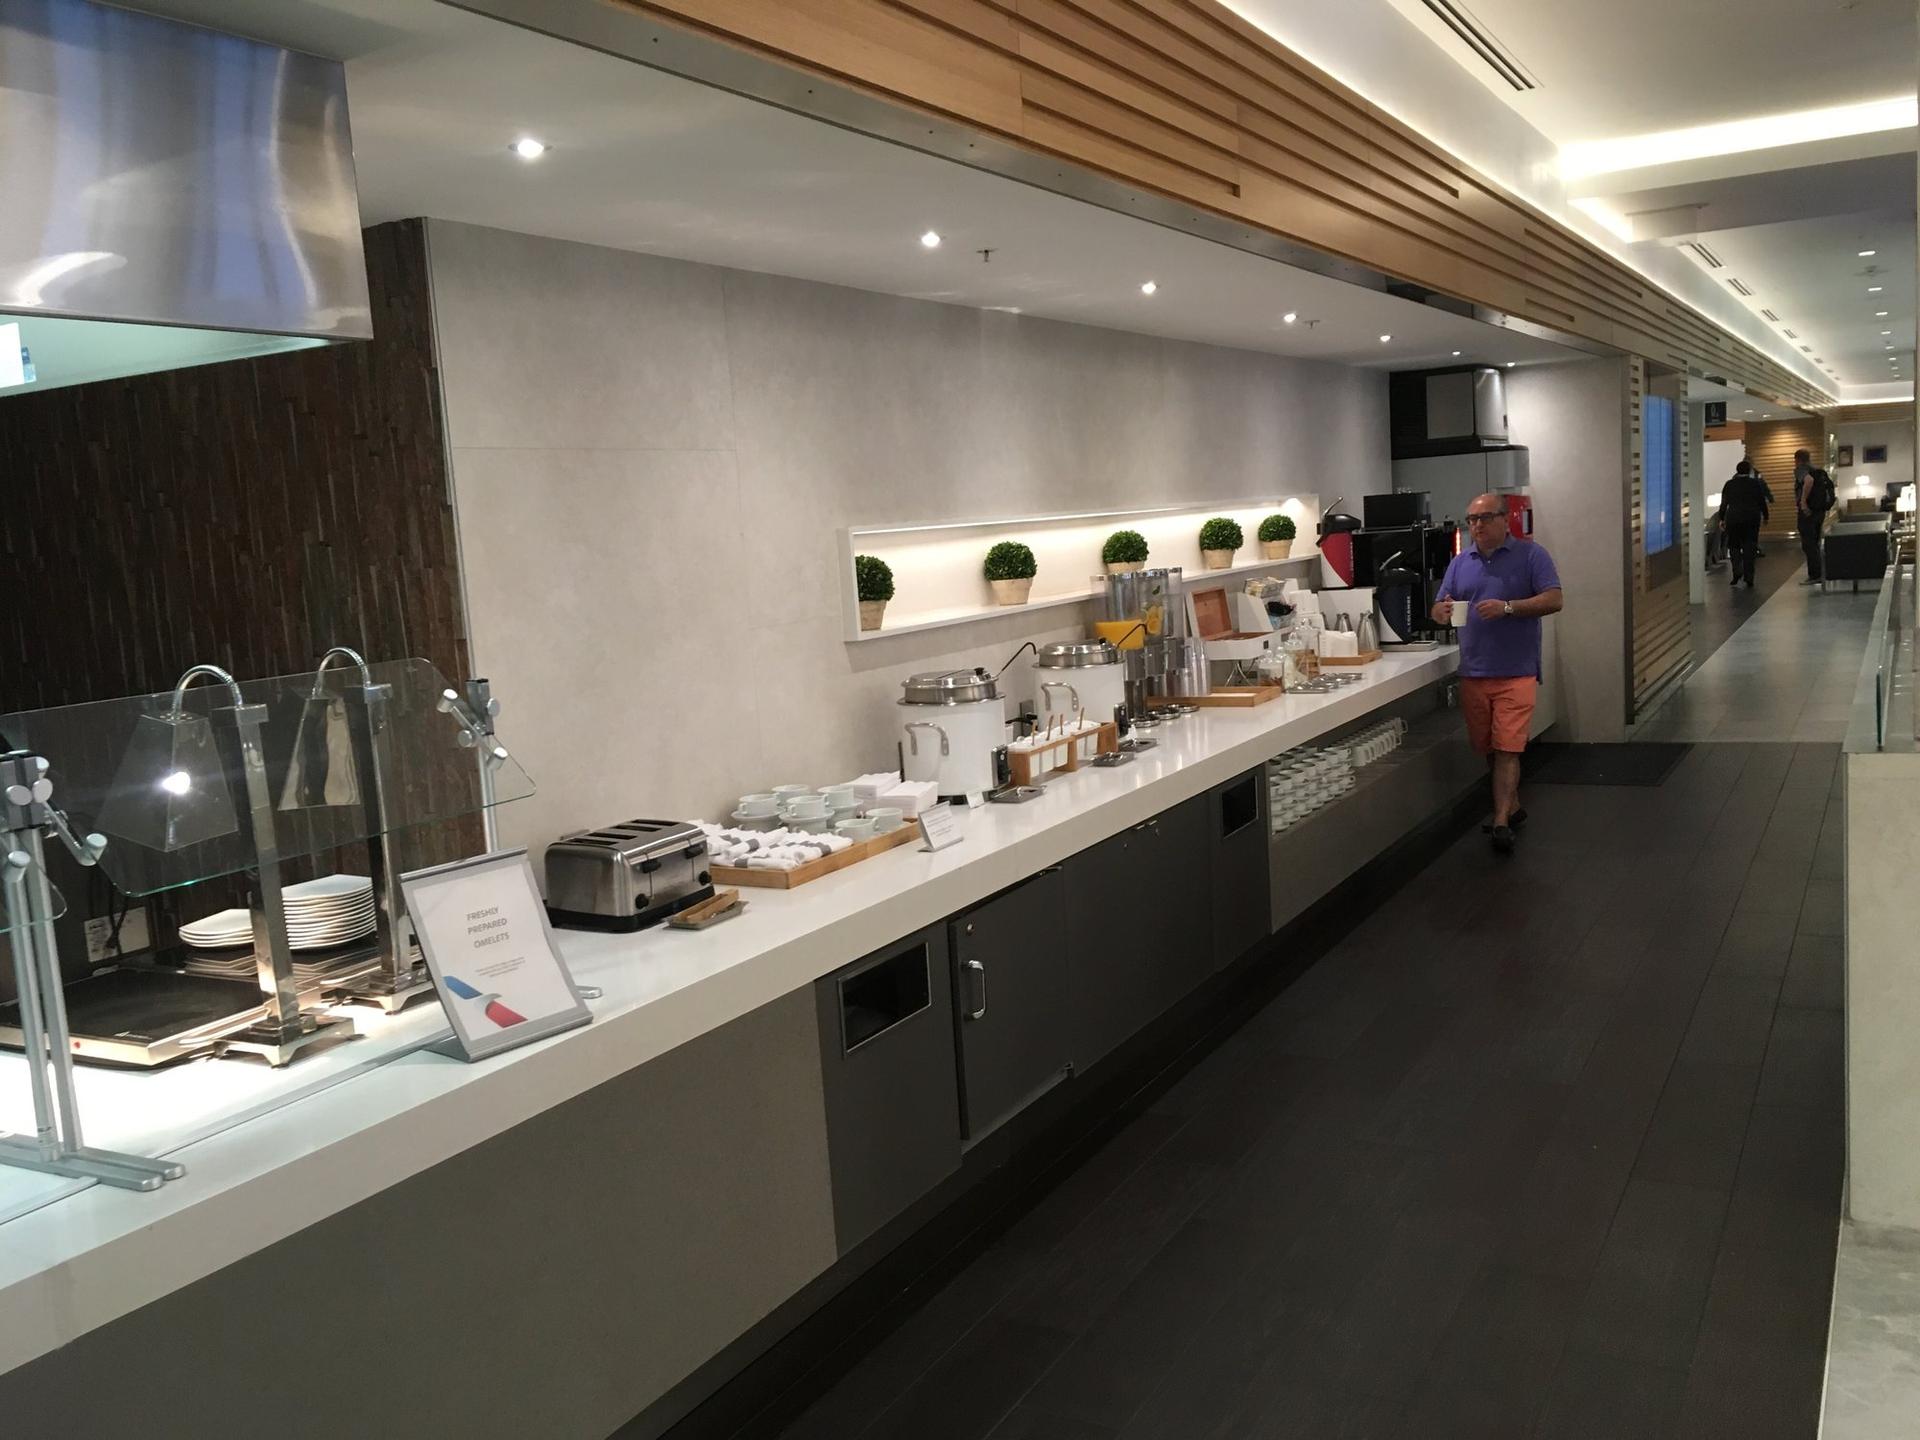 American Airlines Flagship Lounge image 49 of 65